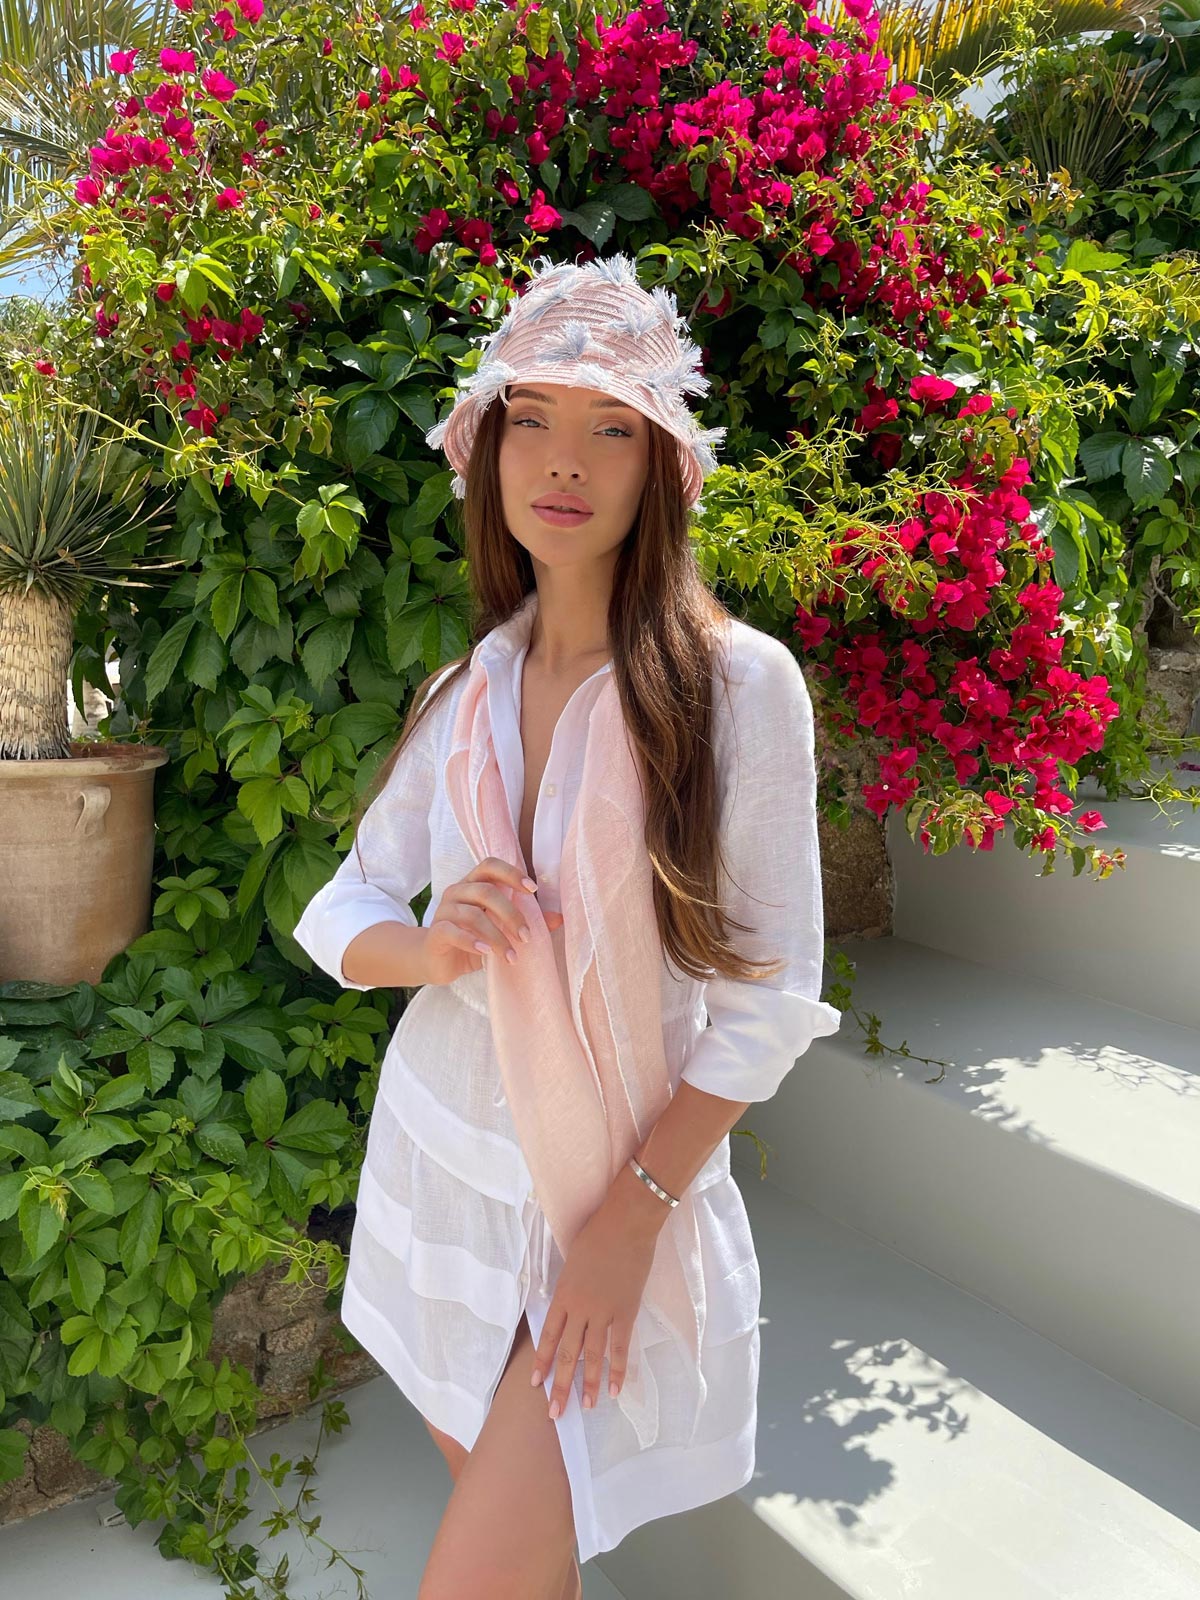 Rhombus Scarf for Woman 100% Capri pink and white linen scarf worn by model